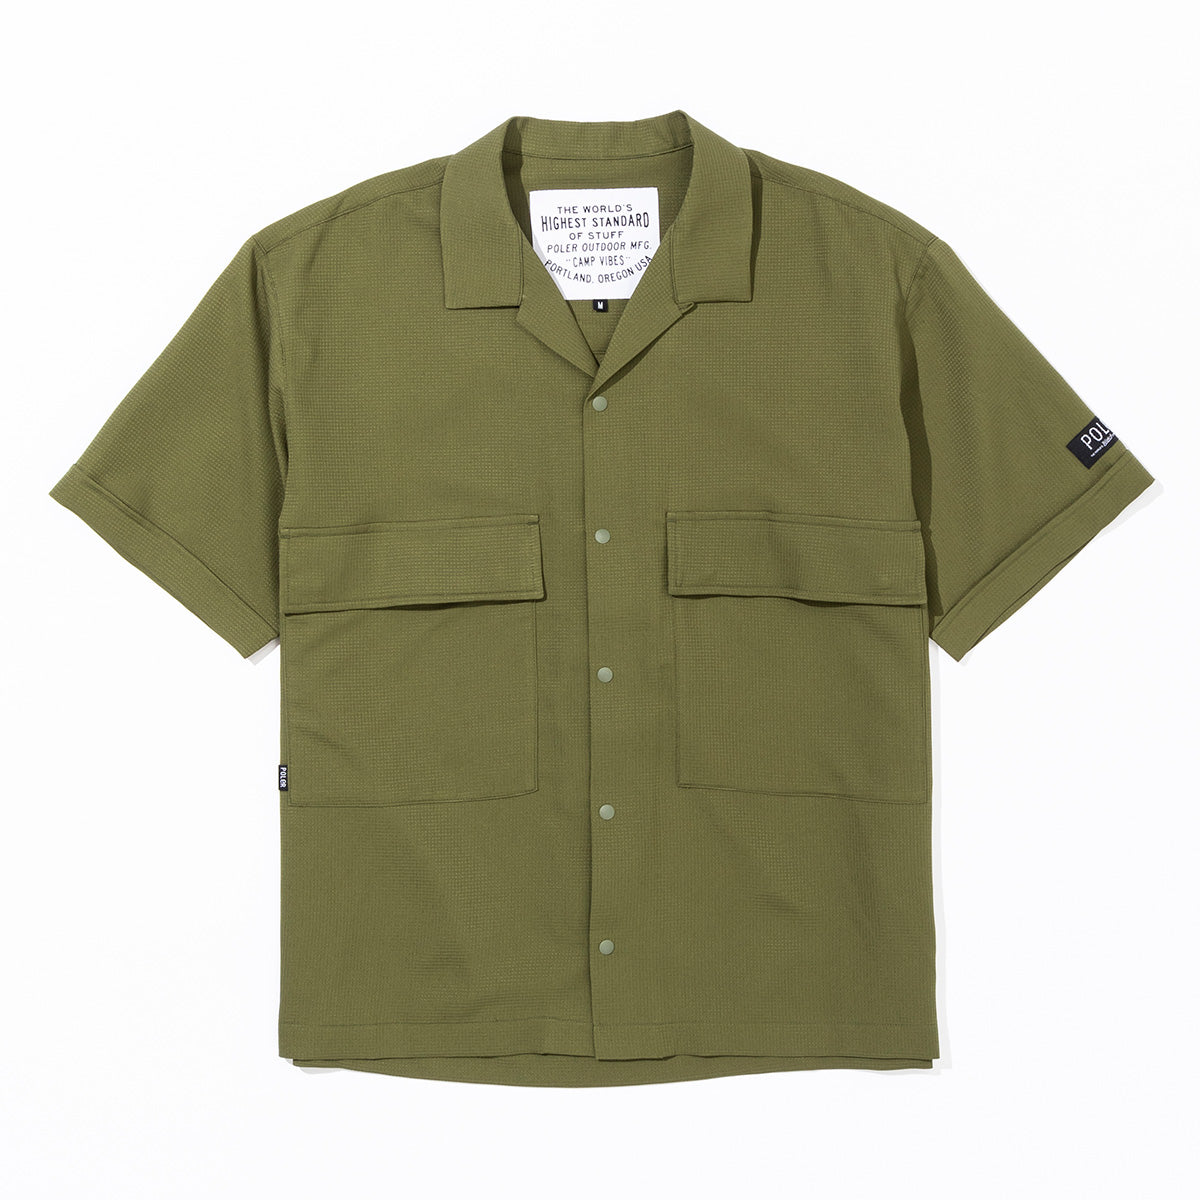 Dot Air Multi Pocket S/S Cool Shirt Button Up OLIVE S 